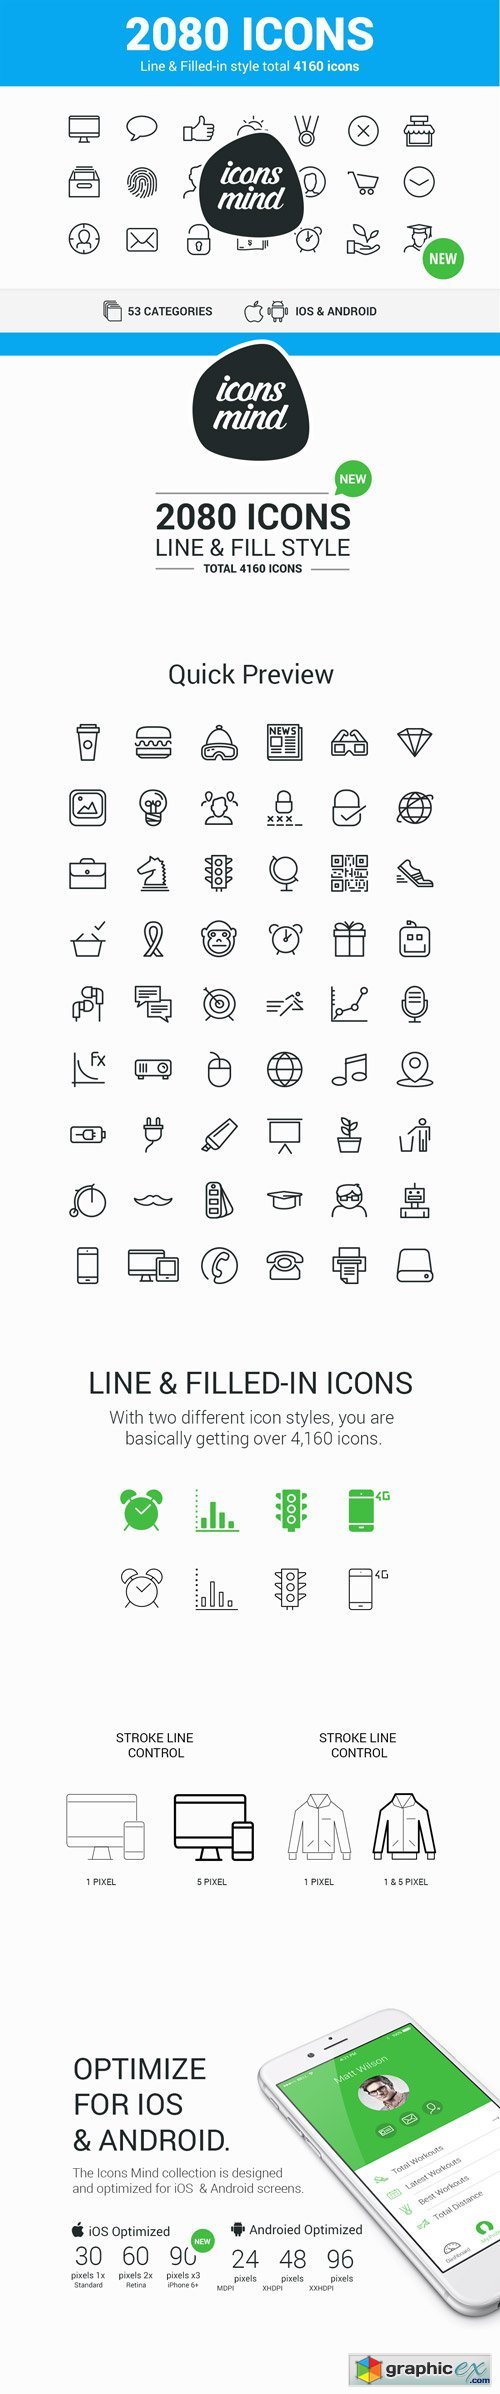 MightyDeals - 2000+ High-Quality Vector Icons (outline and filled)